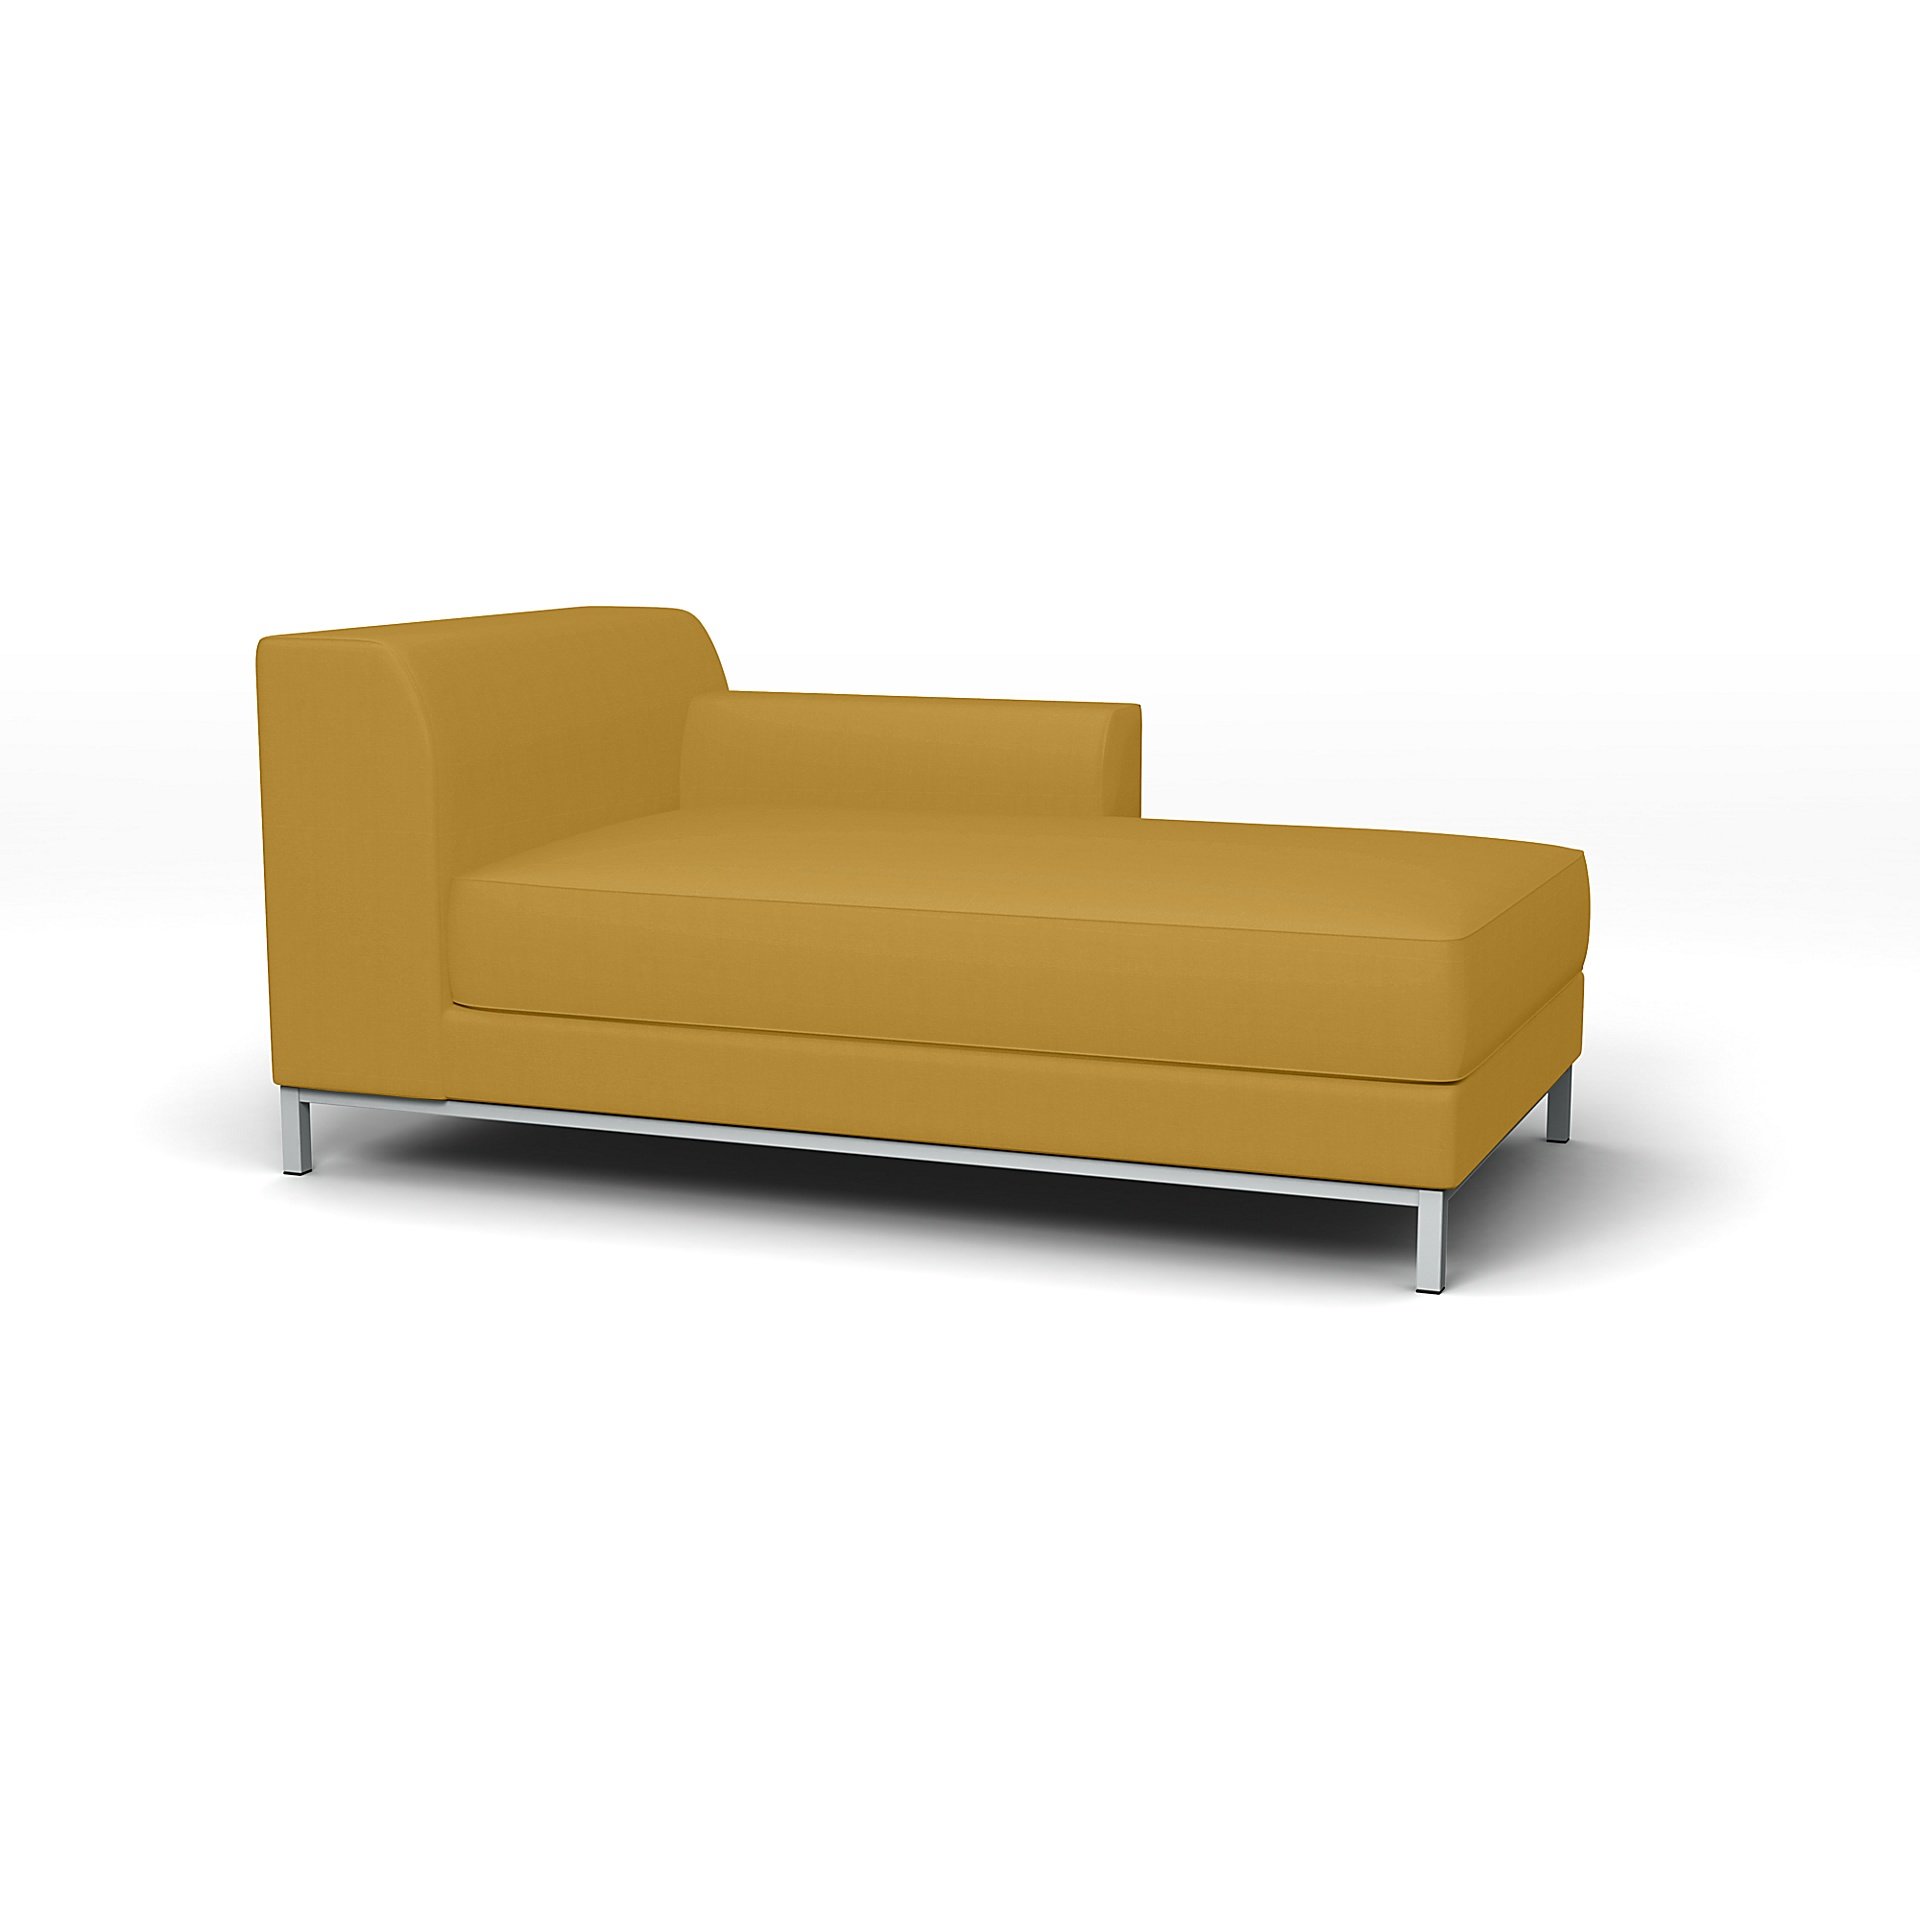 IKEA - Kramfors Chaise Longue with Right Arm Cover, Honey Mustard, Cotton - Bemz